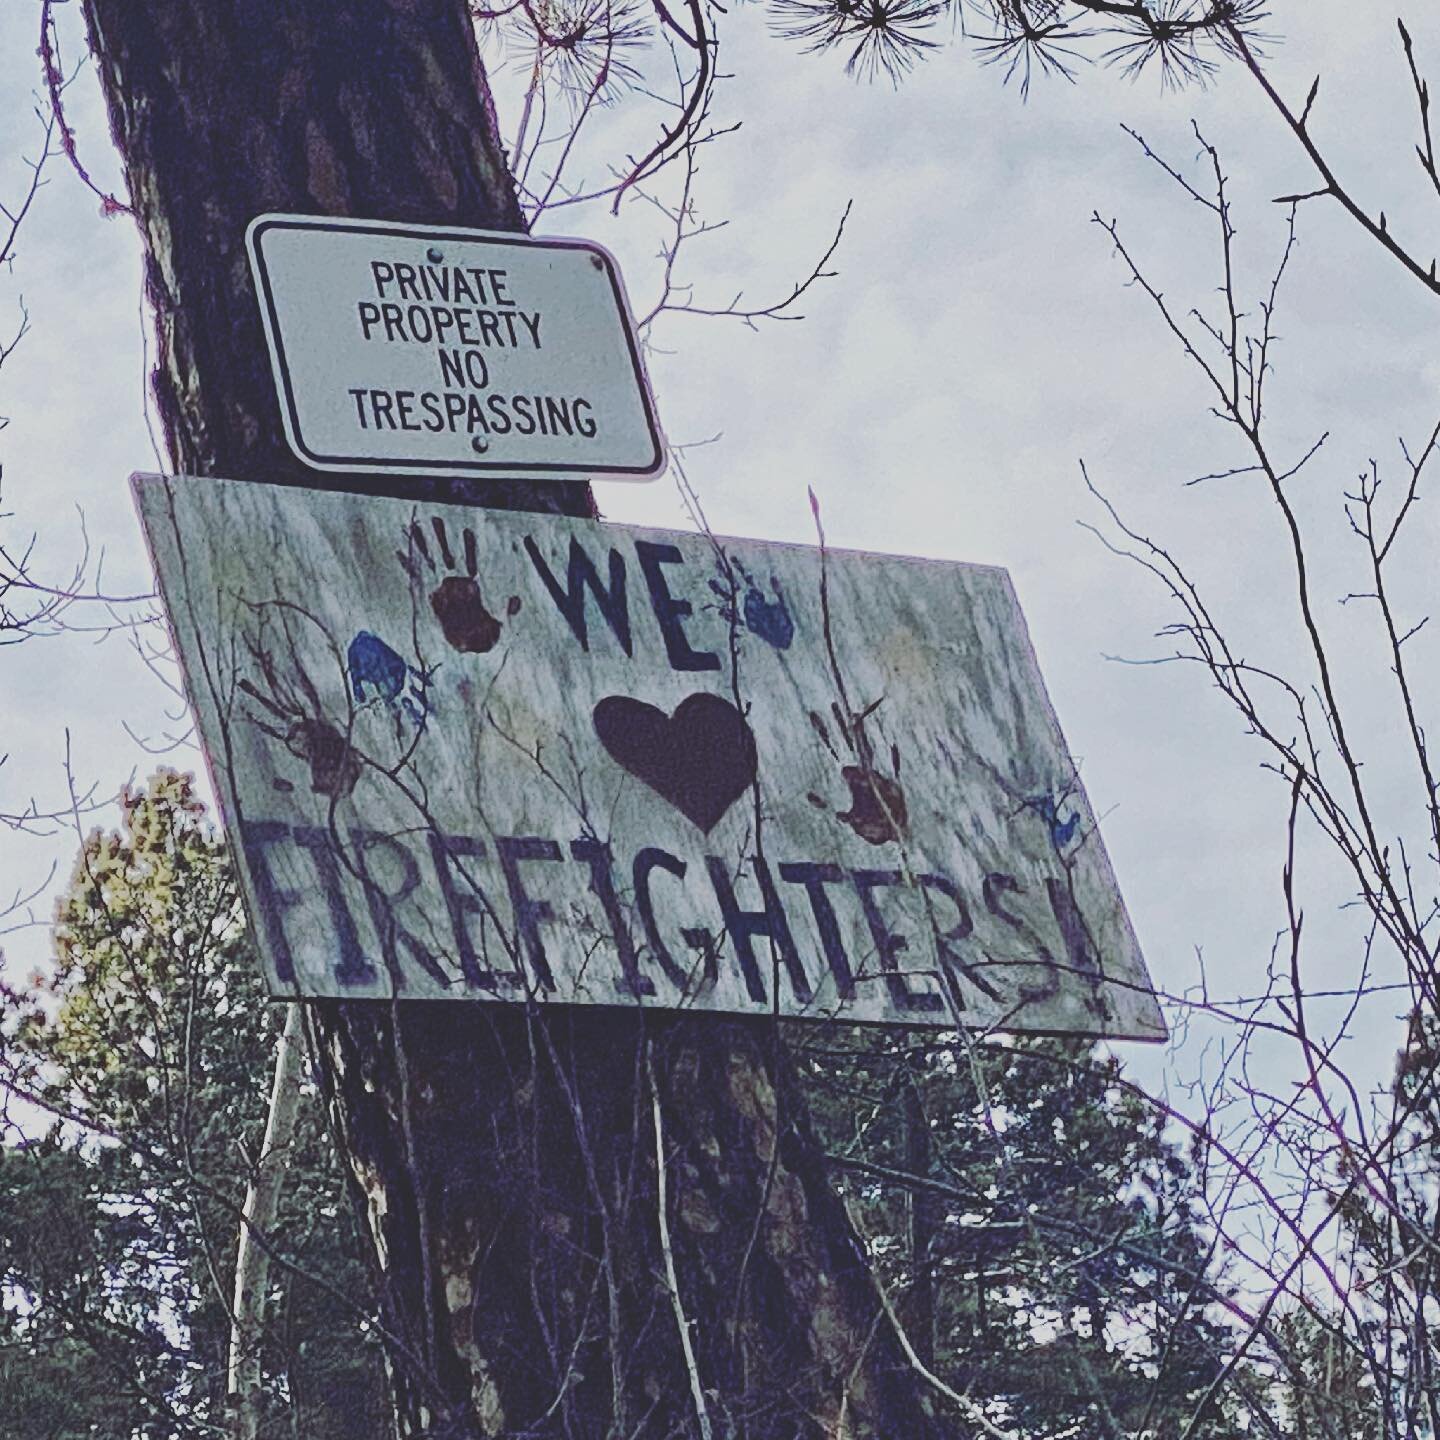 Took a little trip up to Buckhorn Road to visit an @emergencyrv recipient today. More on that trip as time allows but wanted to post this photo we took along the way in an area devastated by the #cameronpeakfire. Because yes, indeed, we love #firefig